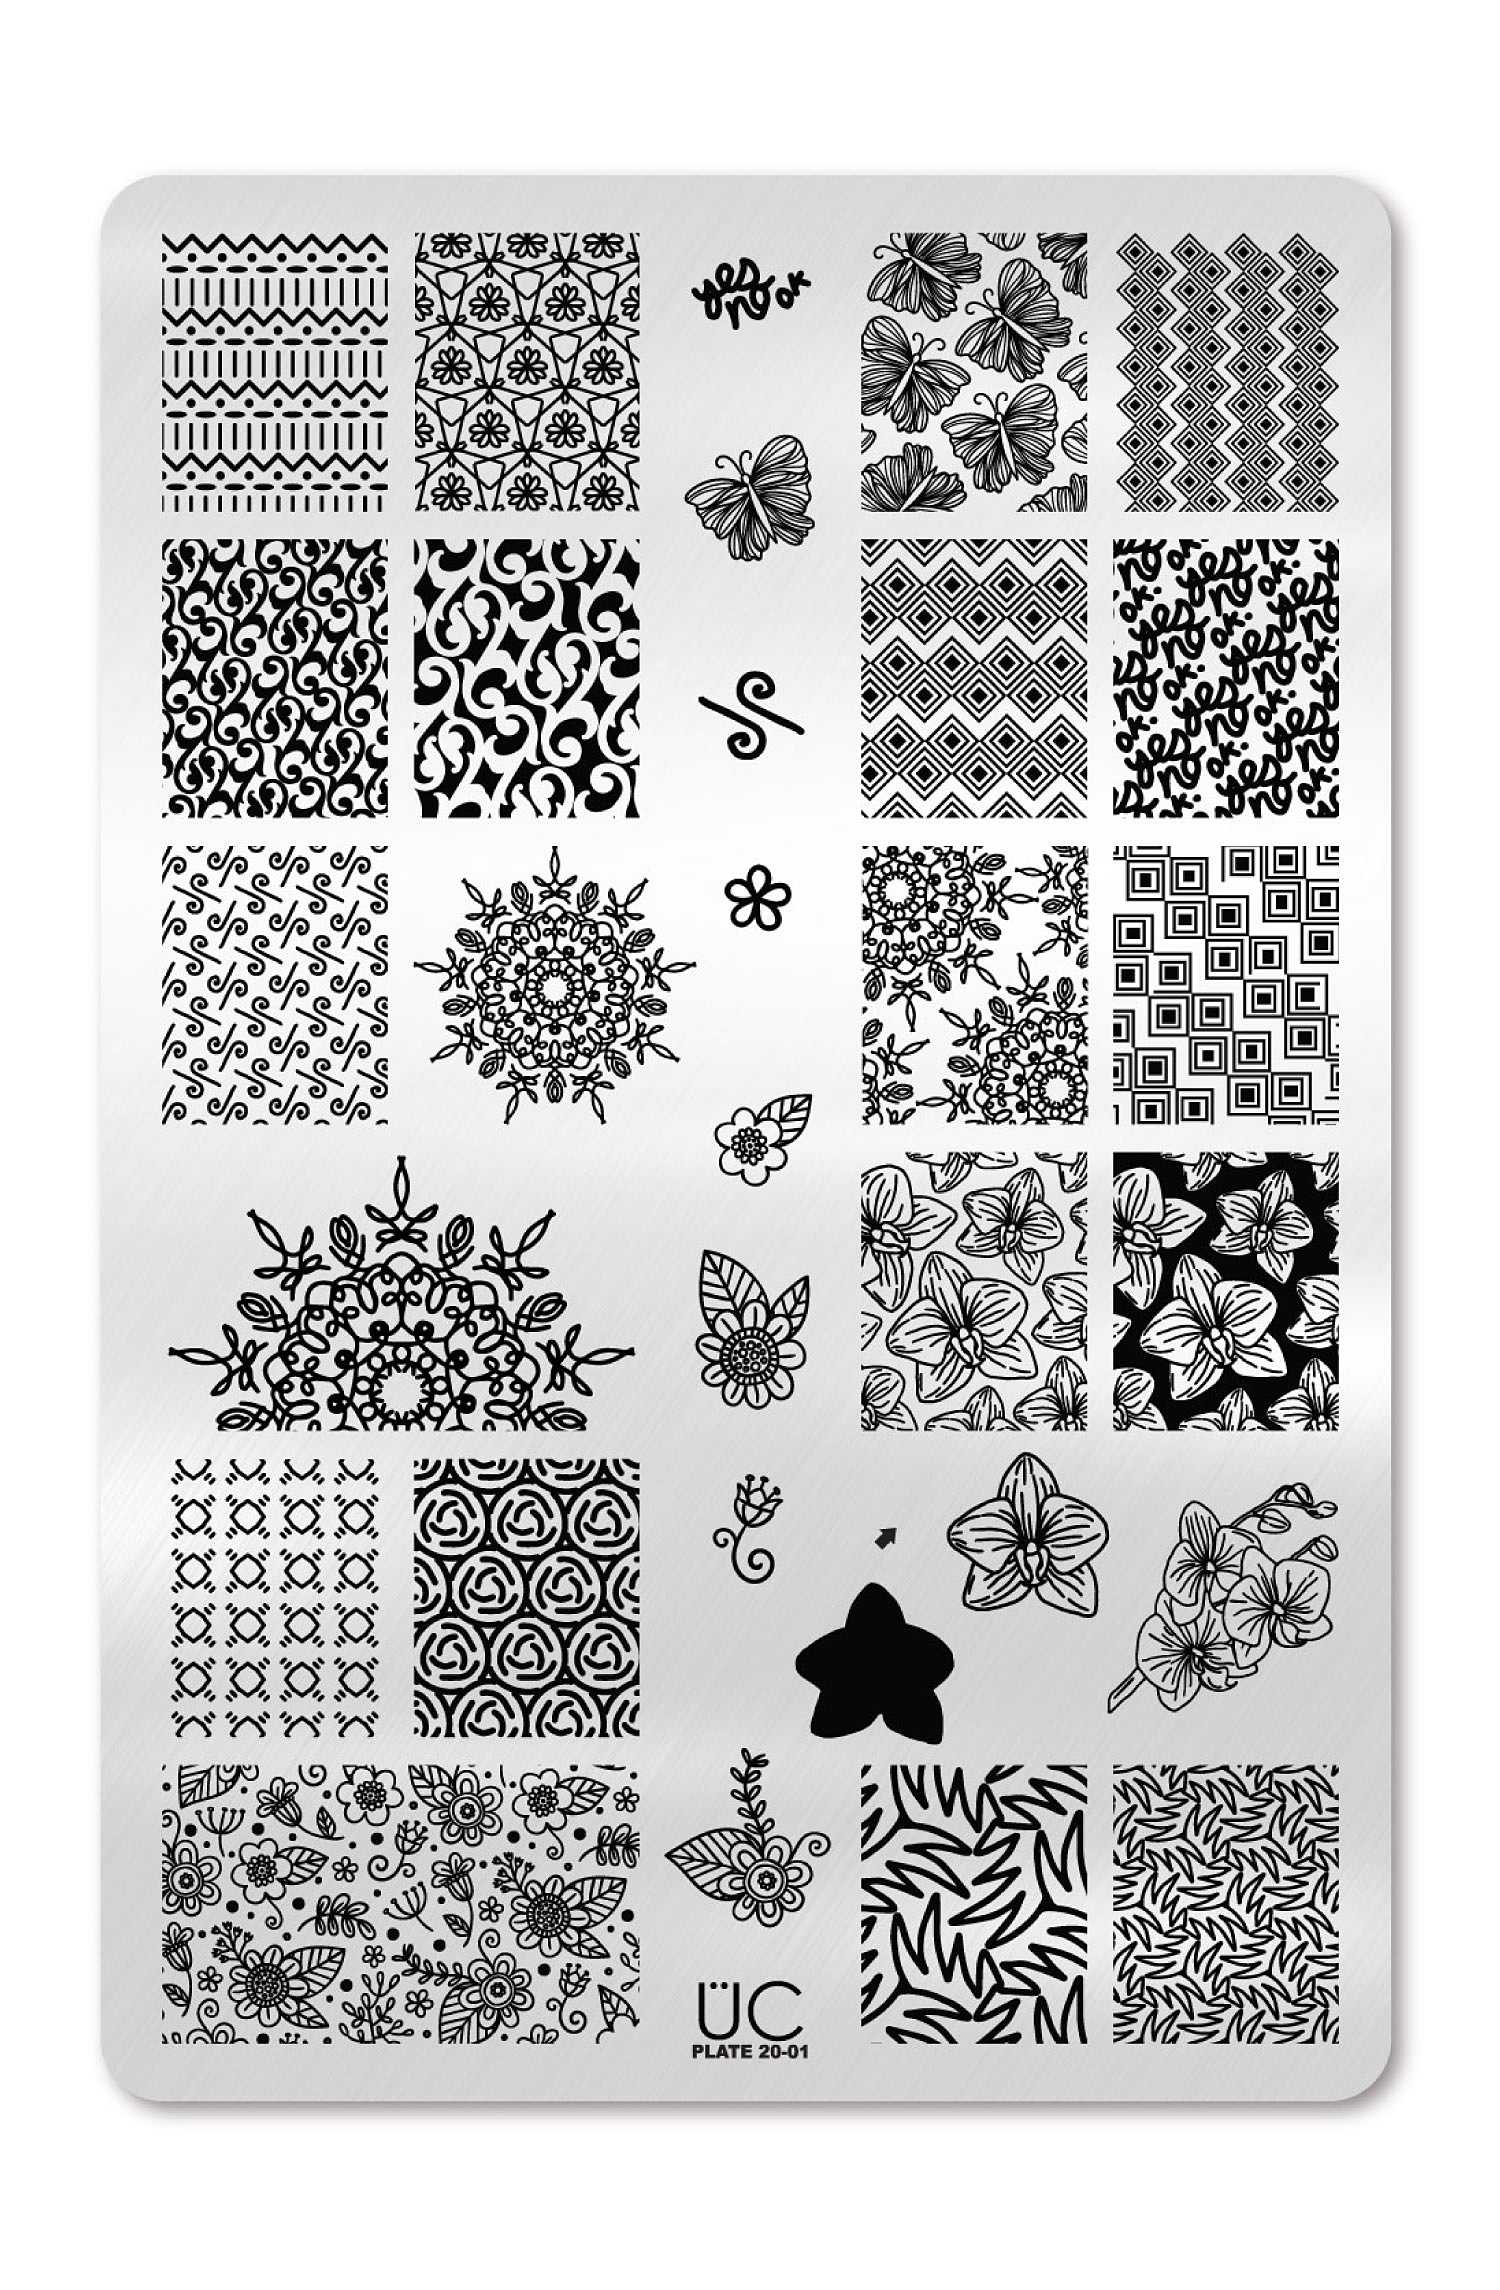 Stamping Plate 20 –